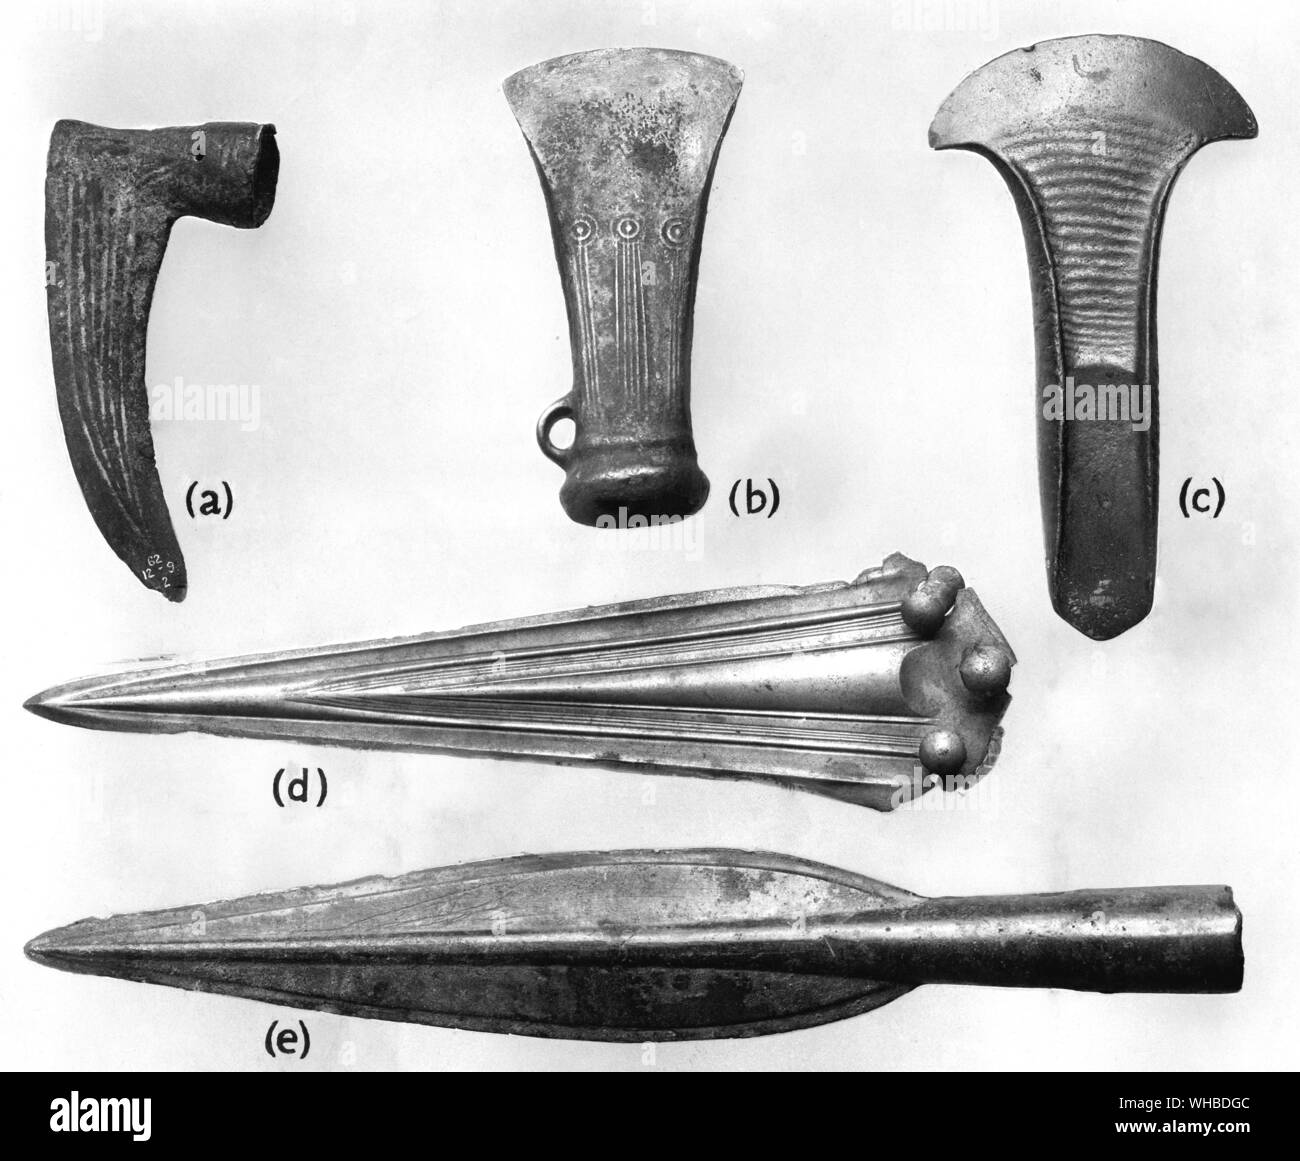 British Bronze Age Implements - a: Flanged axe from the Thames , length 6.3 in b: Socketed axe from Walthamstow Essex length 4.8 in c: Dagger from the Thames length 10.25 in d: Spearhead from the great hoard found in Heathery Burn Cave Co Durham length 12.5 in e: Socketed sickle British type length 5.0 in Stock Photo